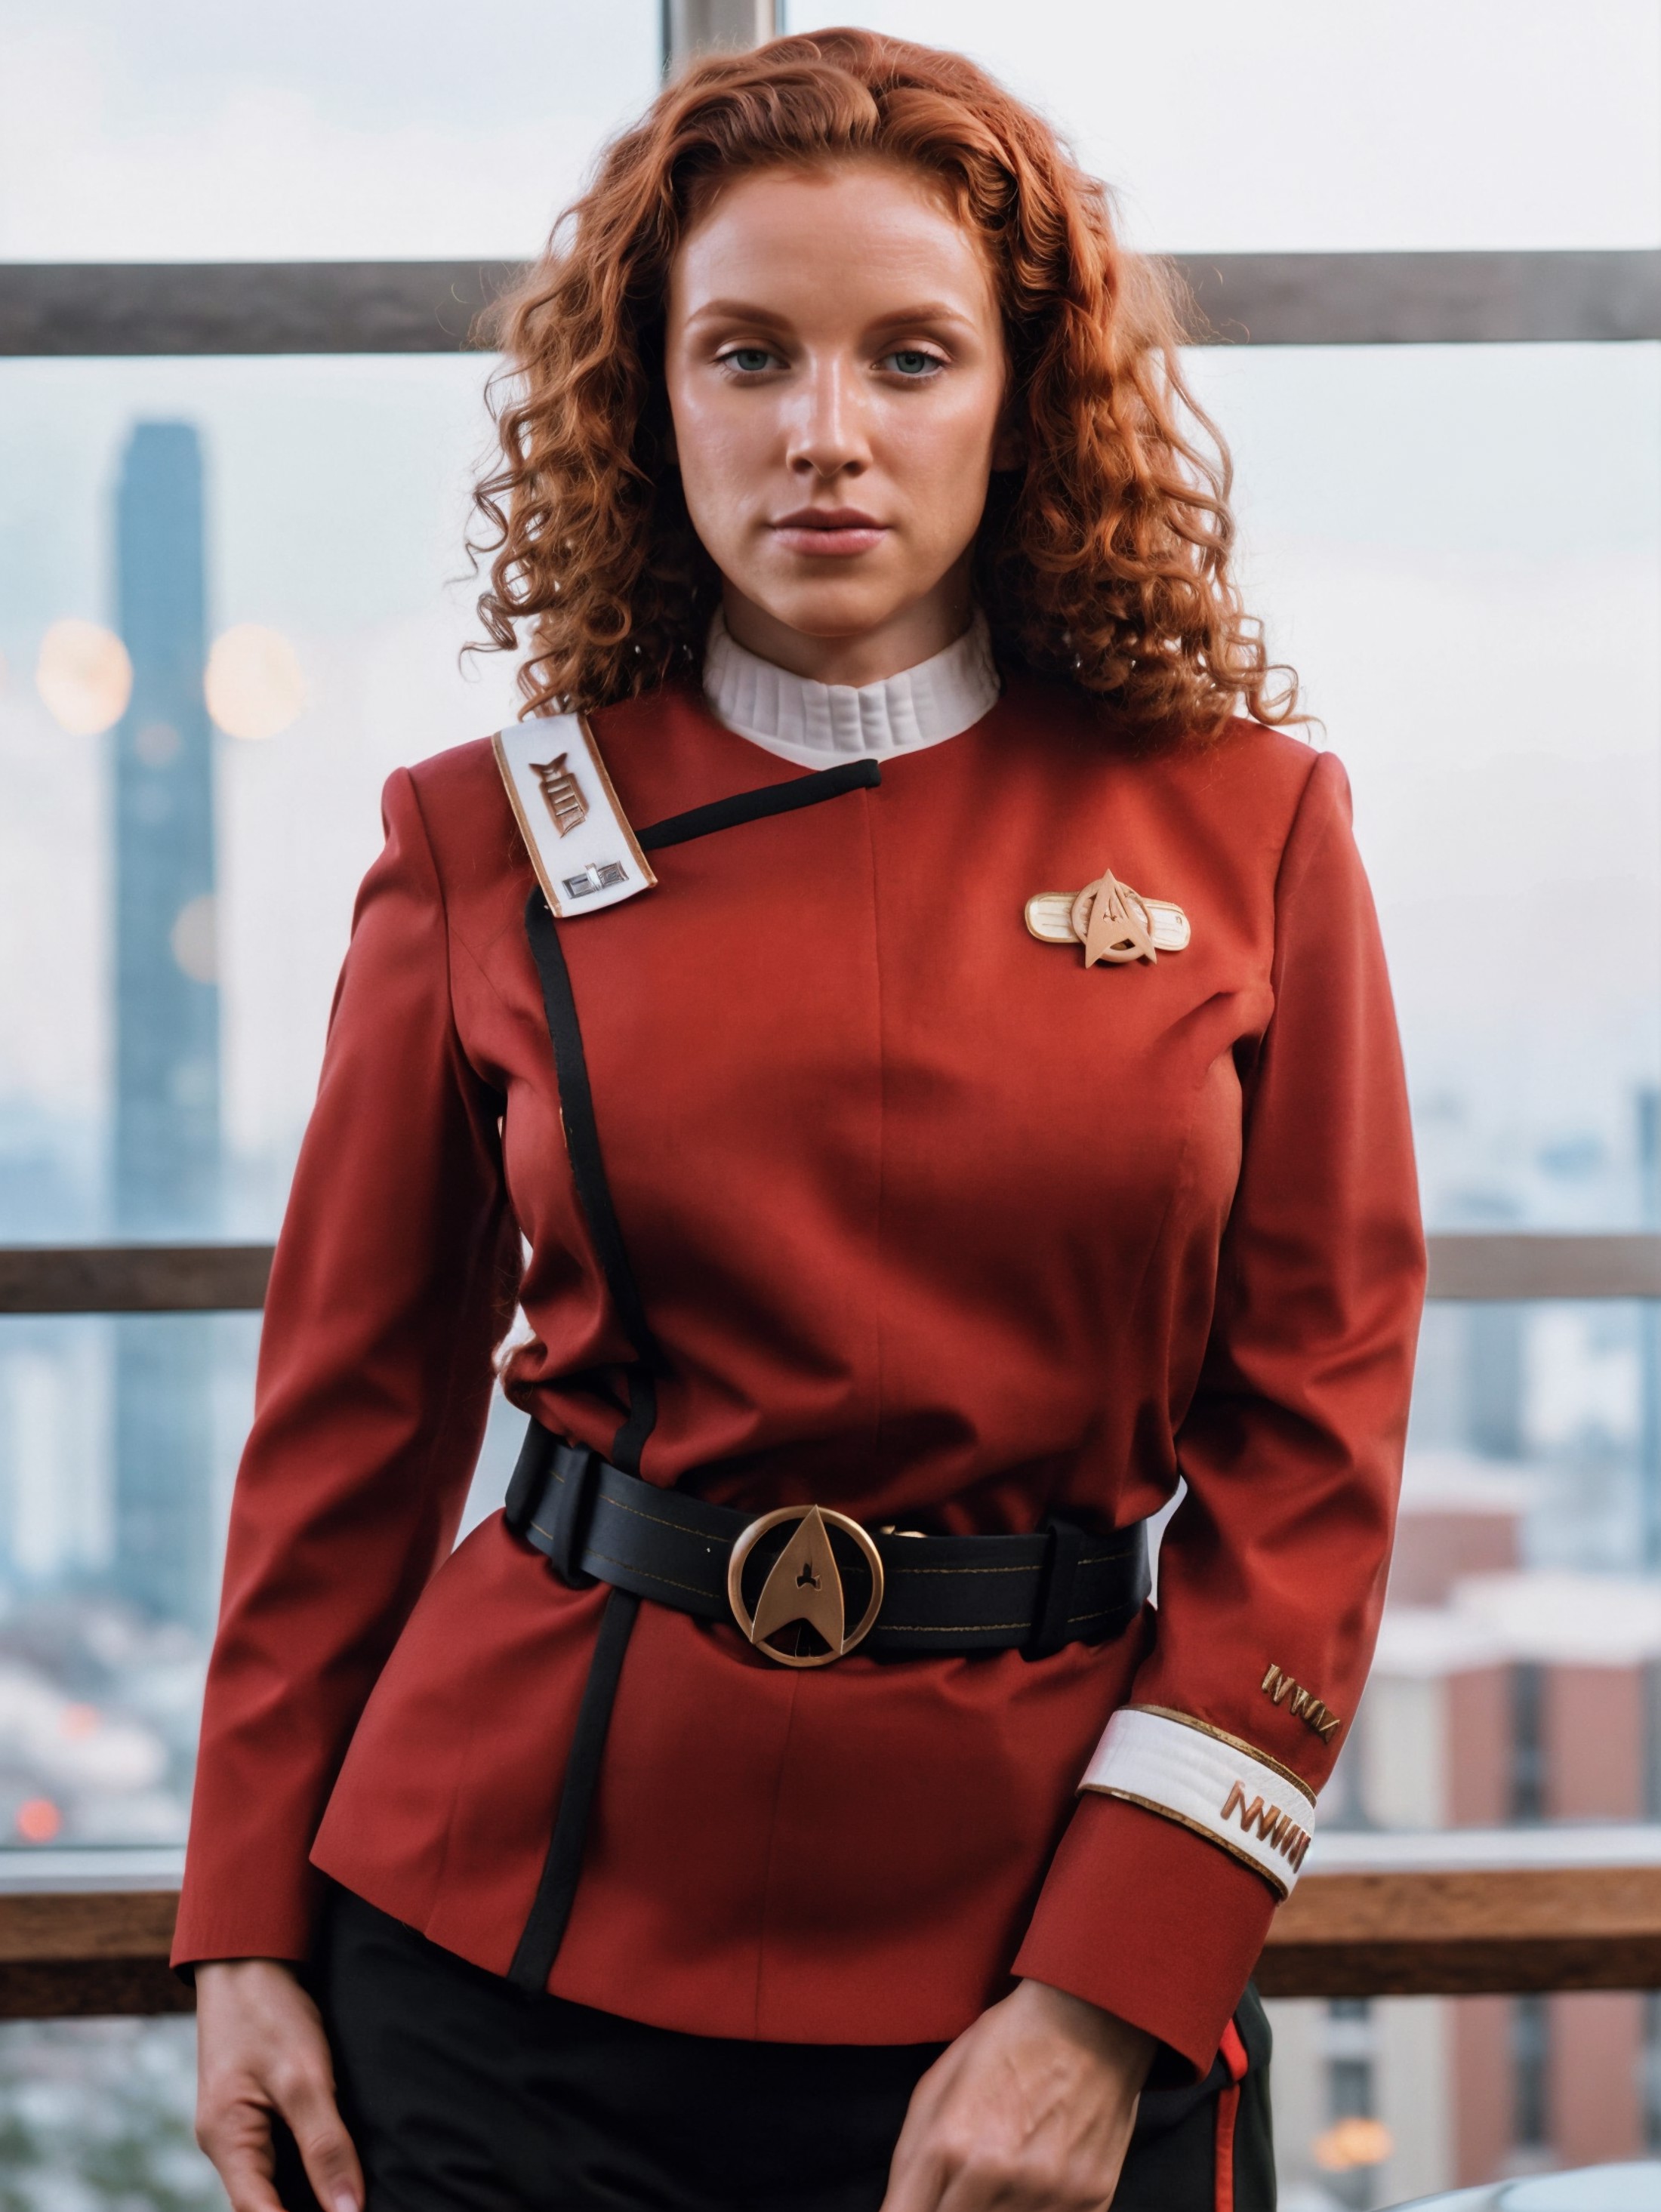 ginger older stunning woman with curly hair in twokunf red uniform,professional photograph of a stunning woman detailed, s...